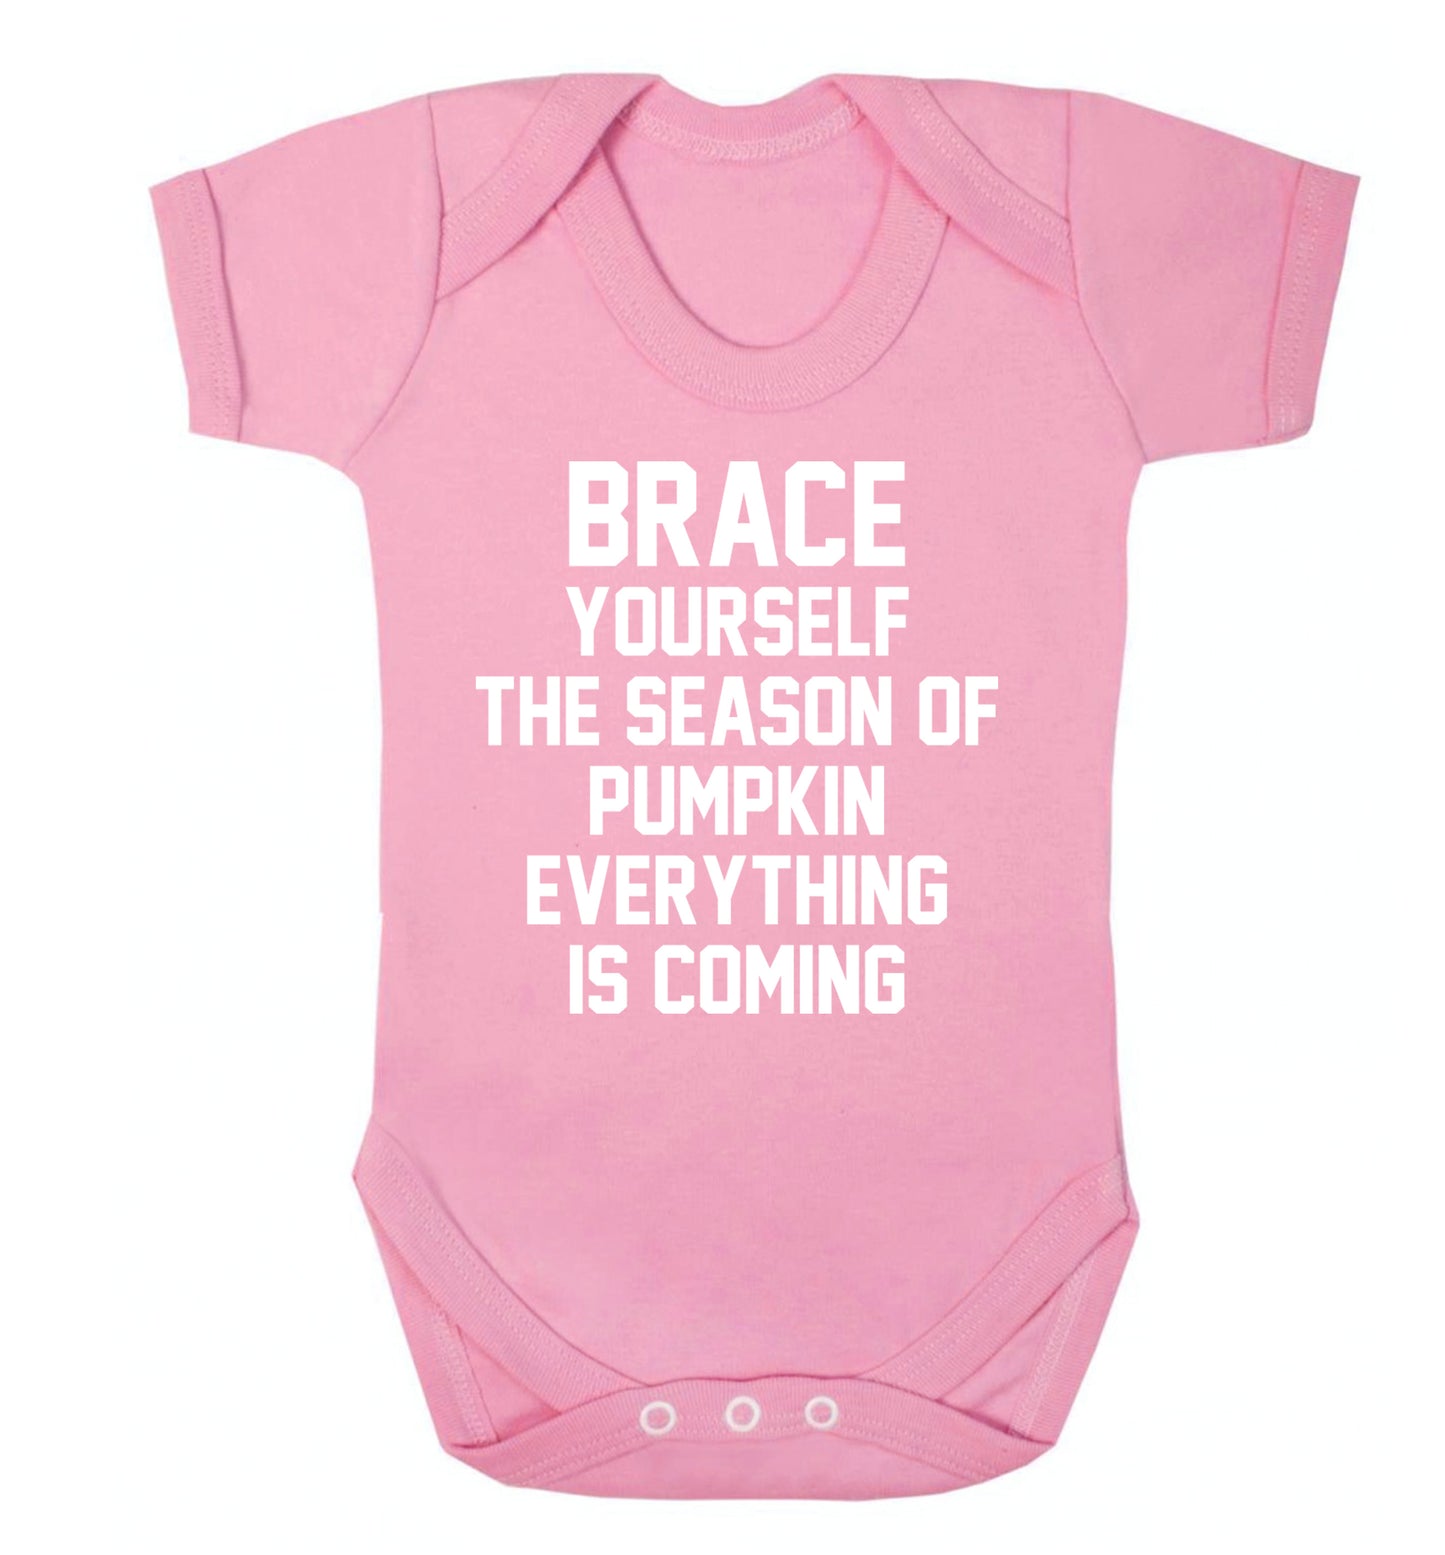 Brace yourself the season of pumpkin everything is coming Baby Vest pale pink 18-24 months